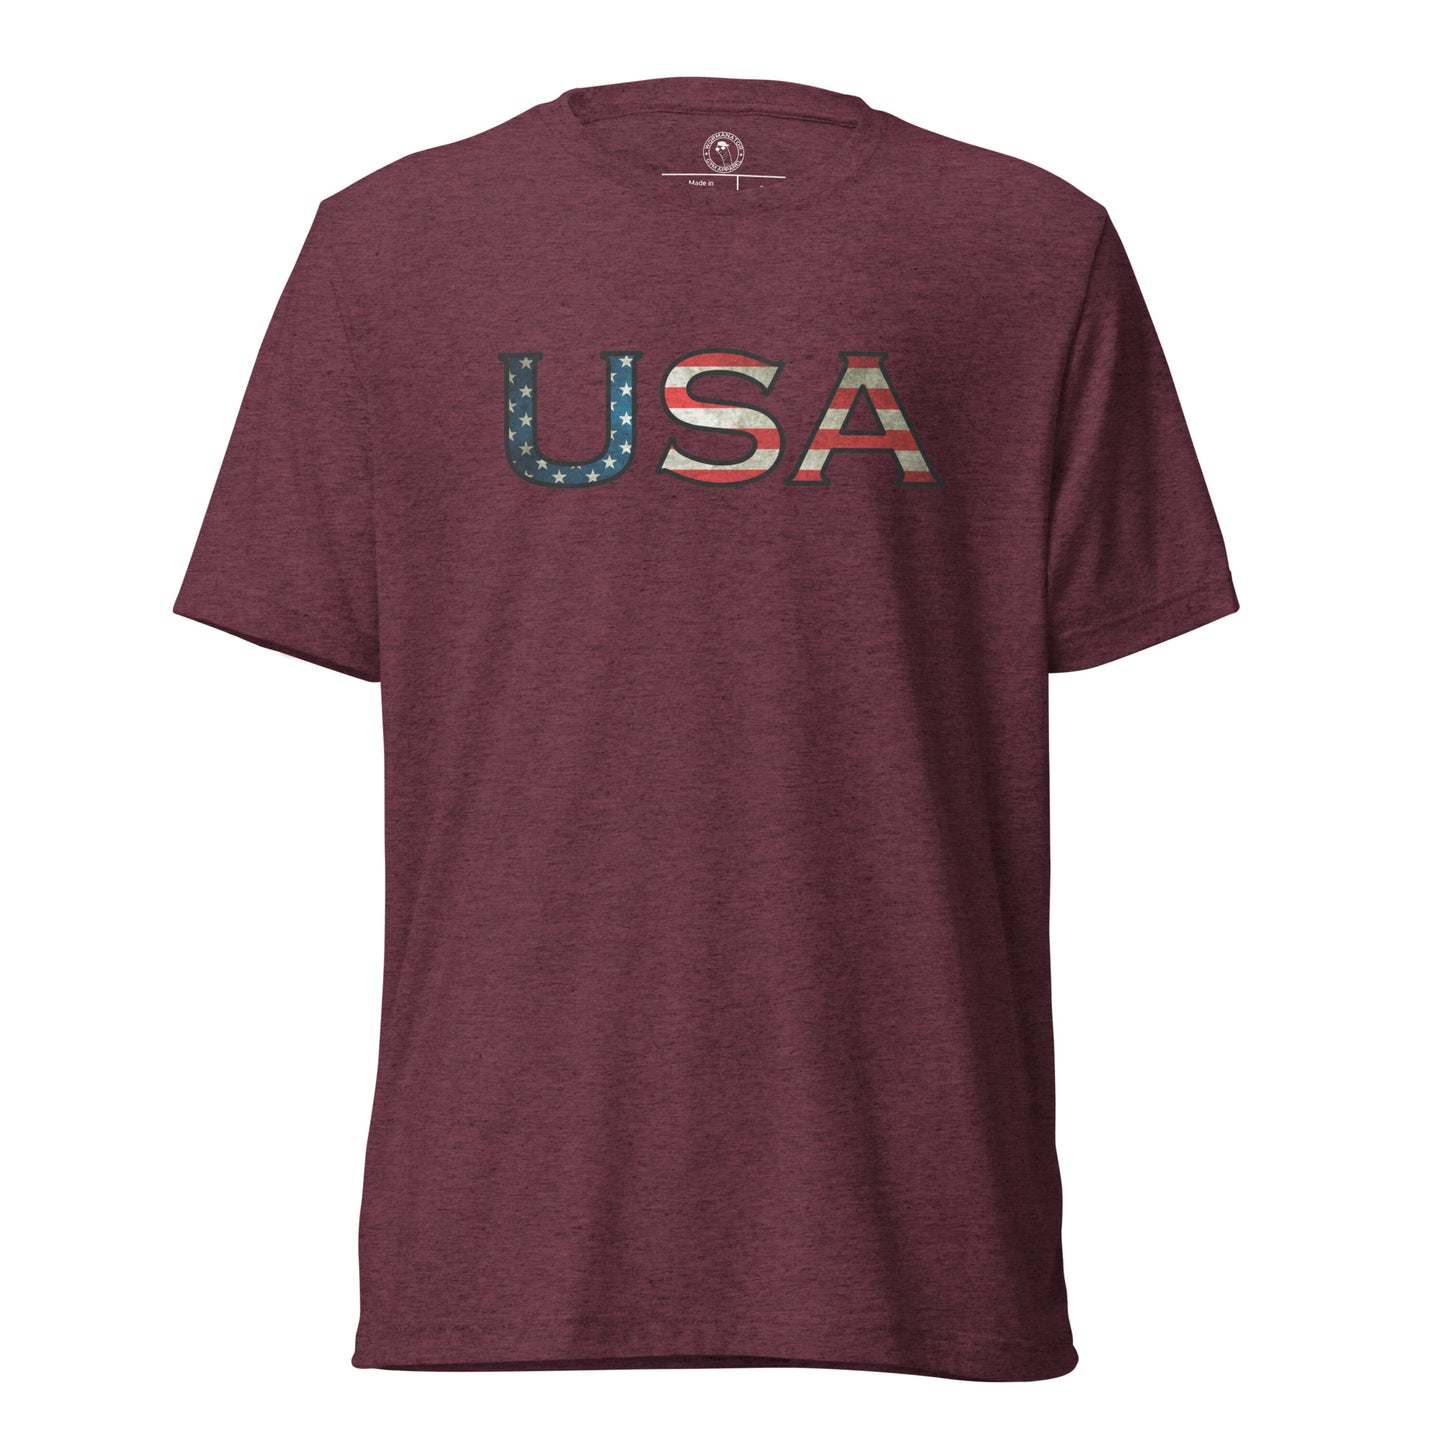 USA T-Shirt in Maroon Triblend